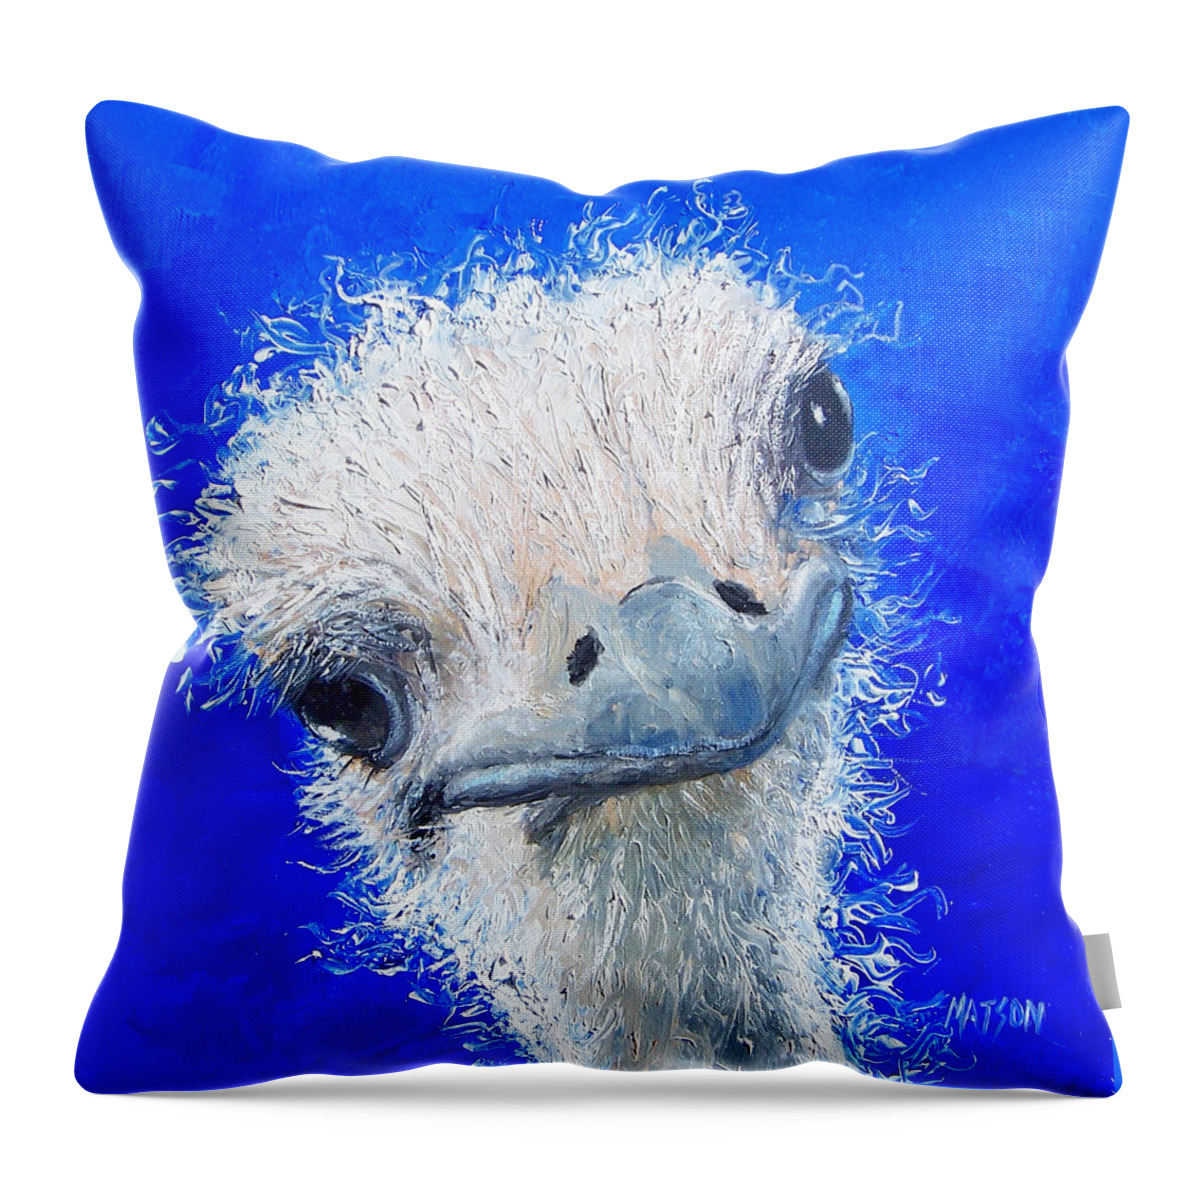 Ostrich Throw Pillow featuring the painting Ostrich Painting 'Waldo' by Jan Matson by Jan Matson